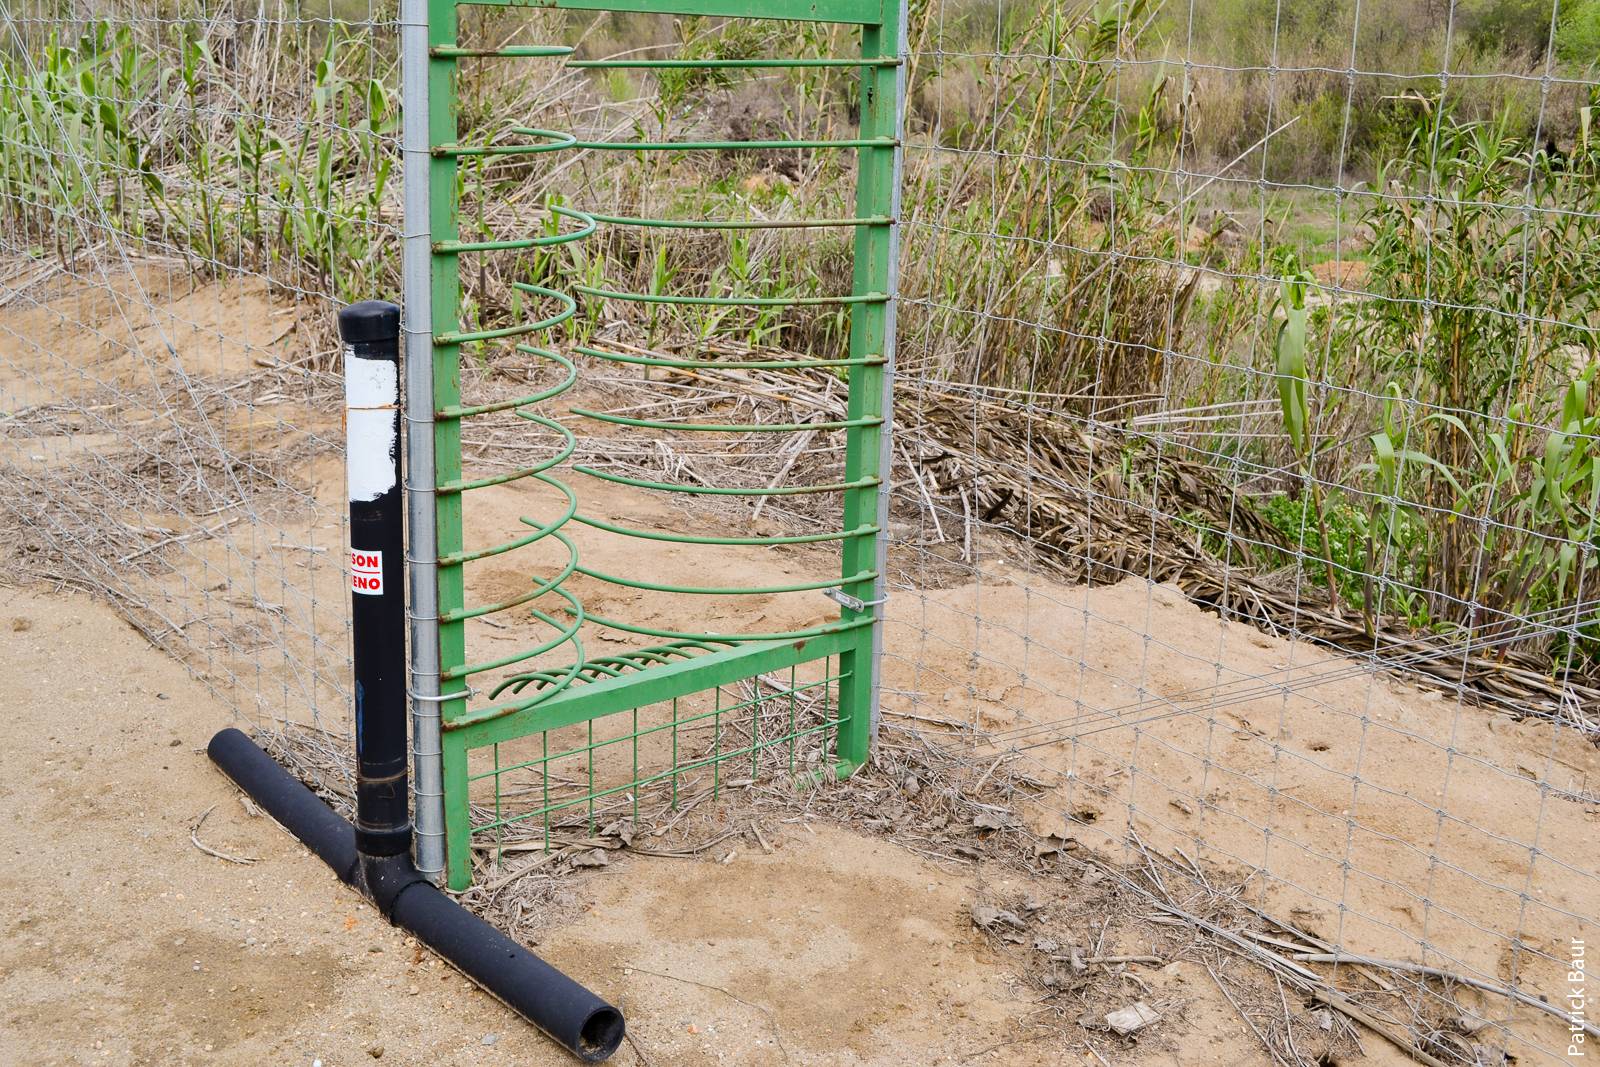 Traps and wildlife exclusion fences are commonly used measures intended to reduce animal intrusions onto fields.